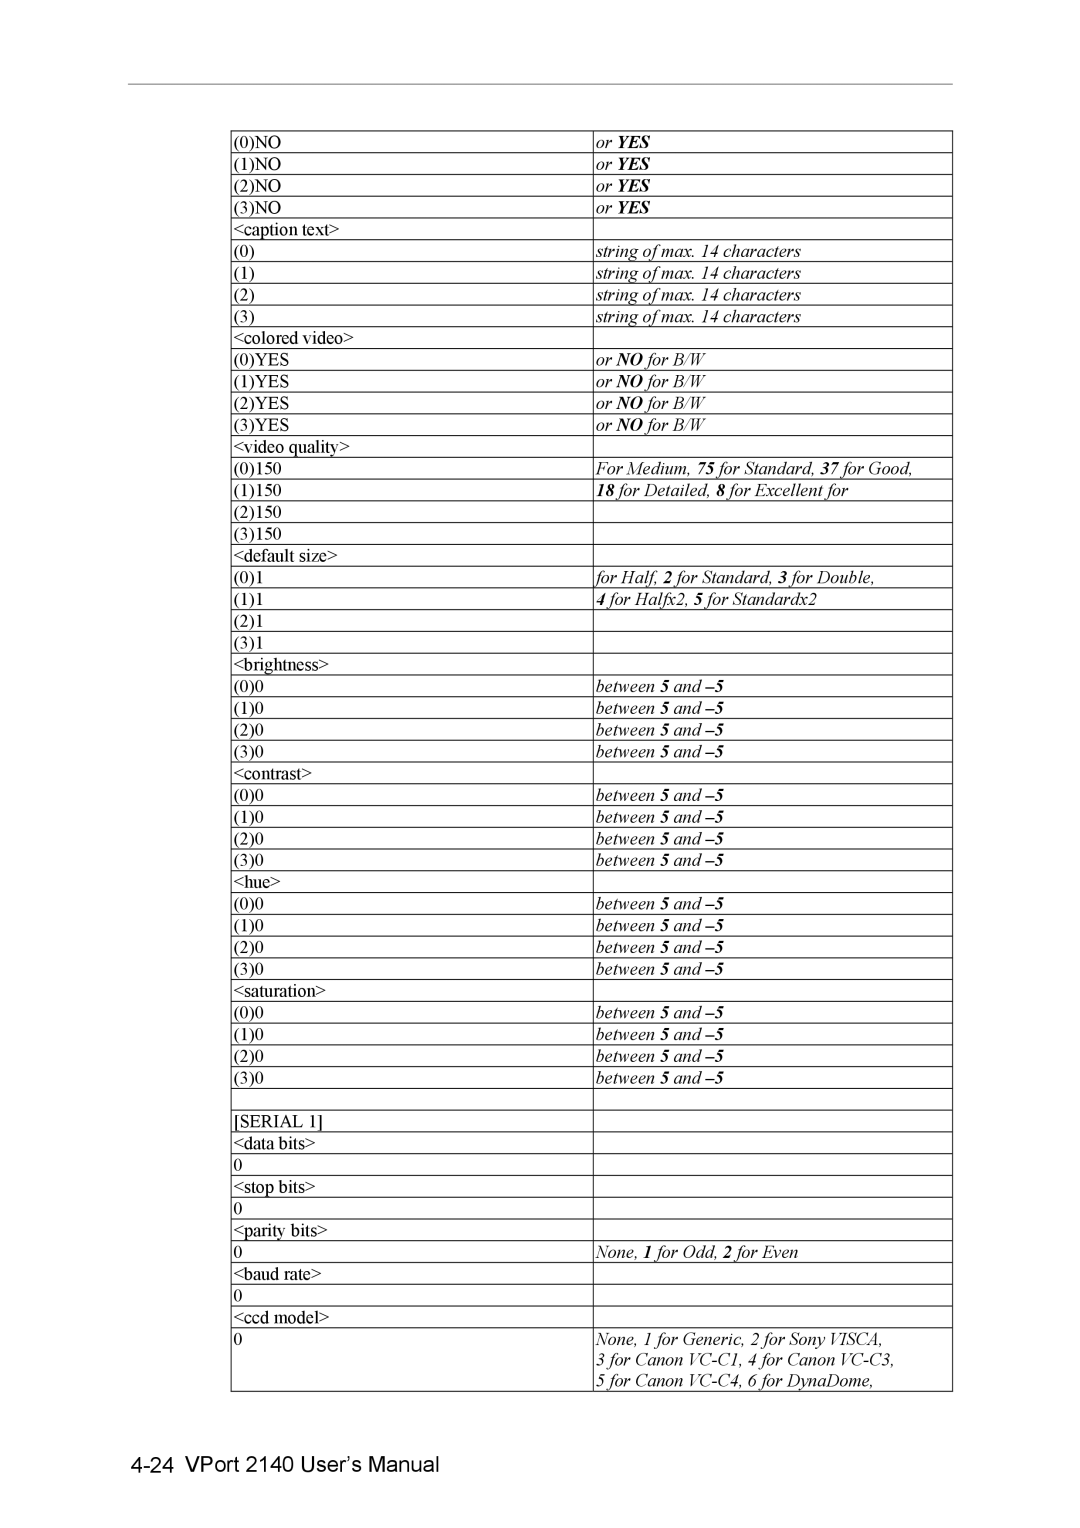 Moxa Technologies 2140 user manual String of max characters 